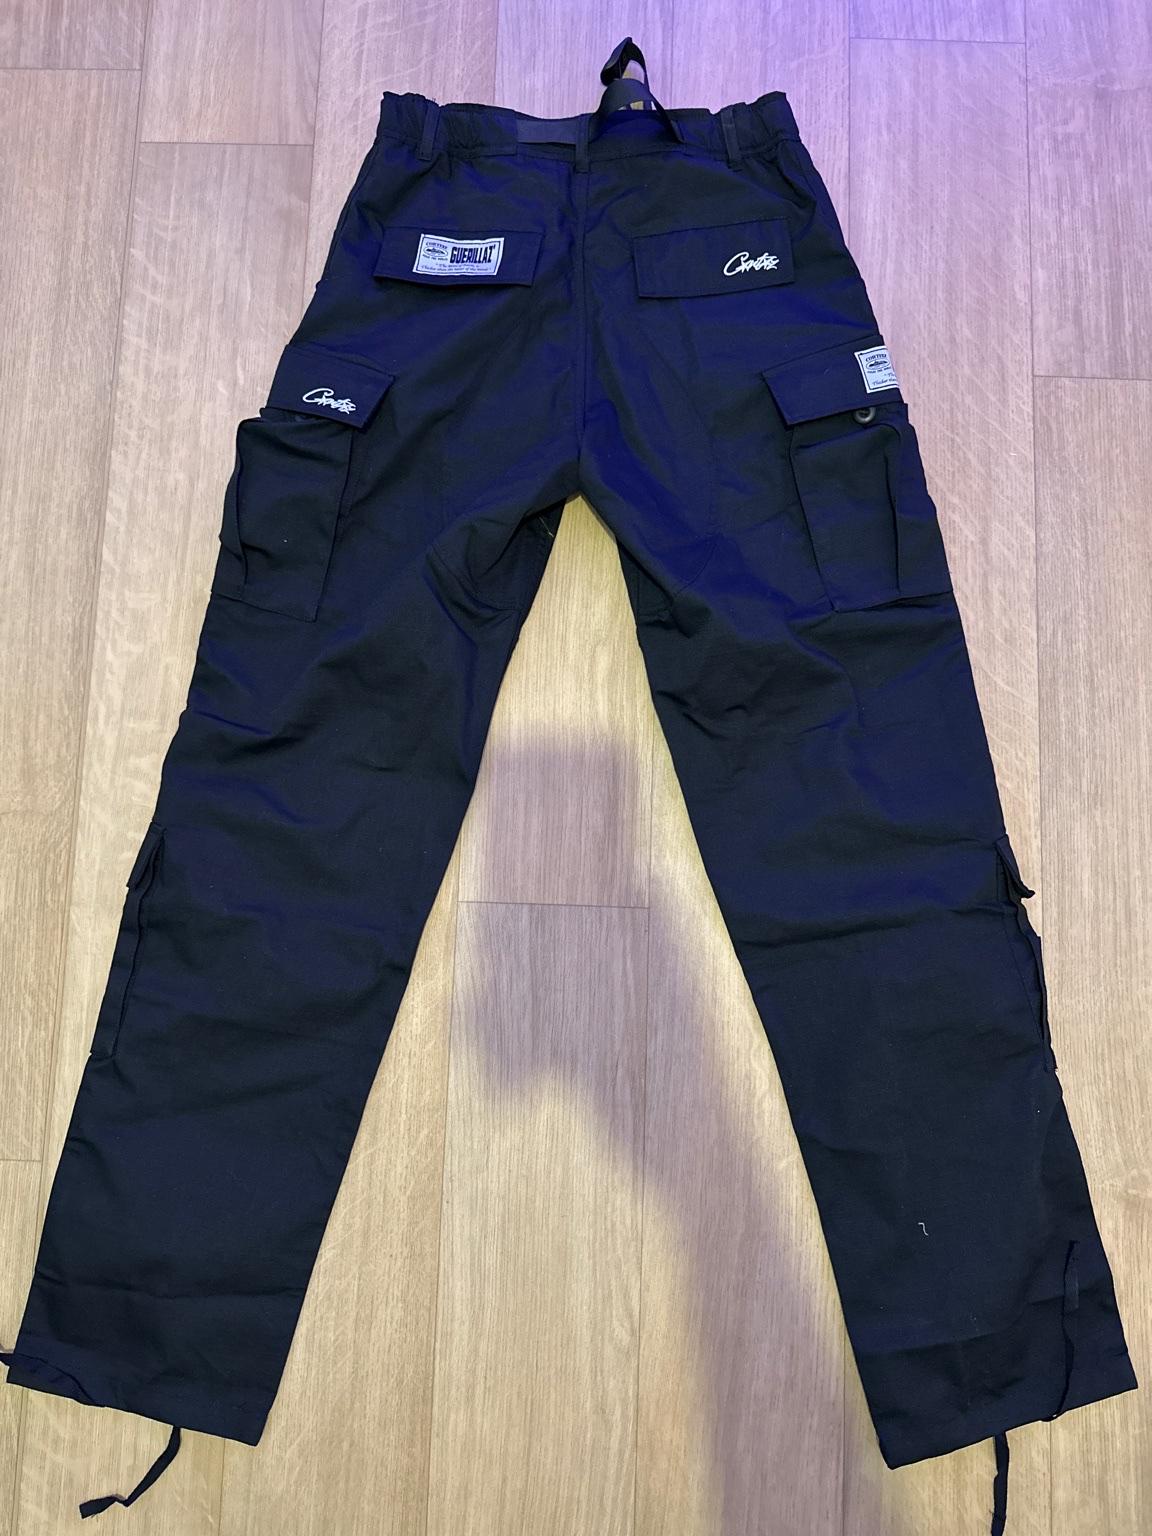 Cortiez Cargo trousers in SW8 London for £65.00 for sale | Shpock